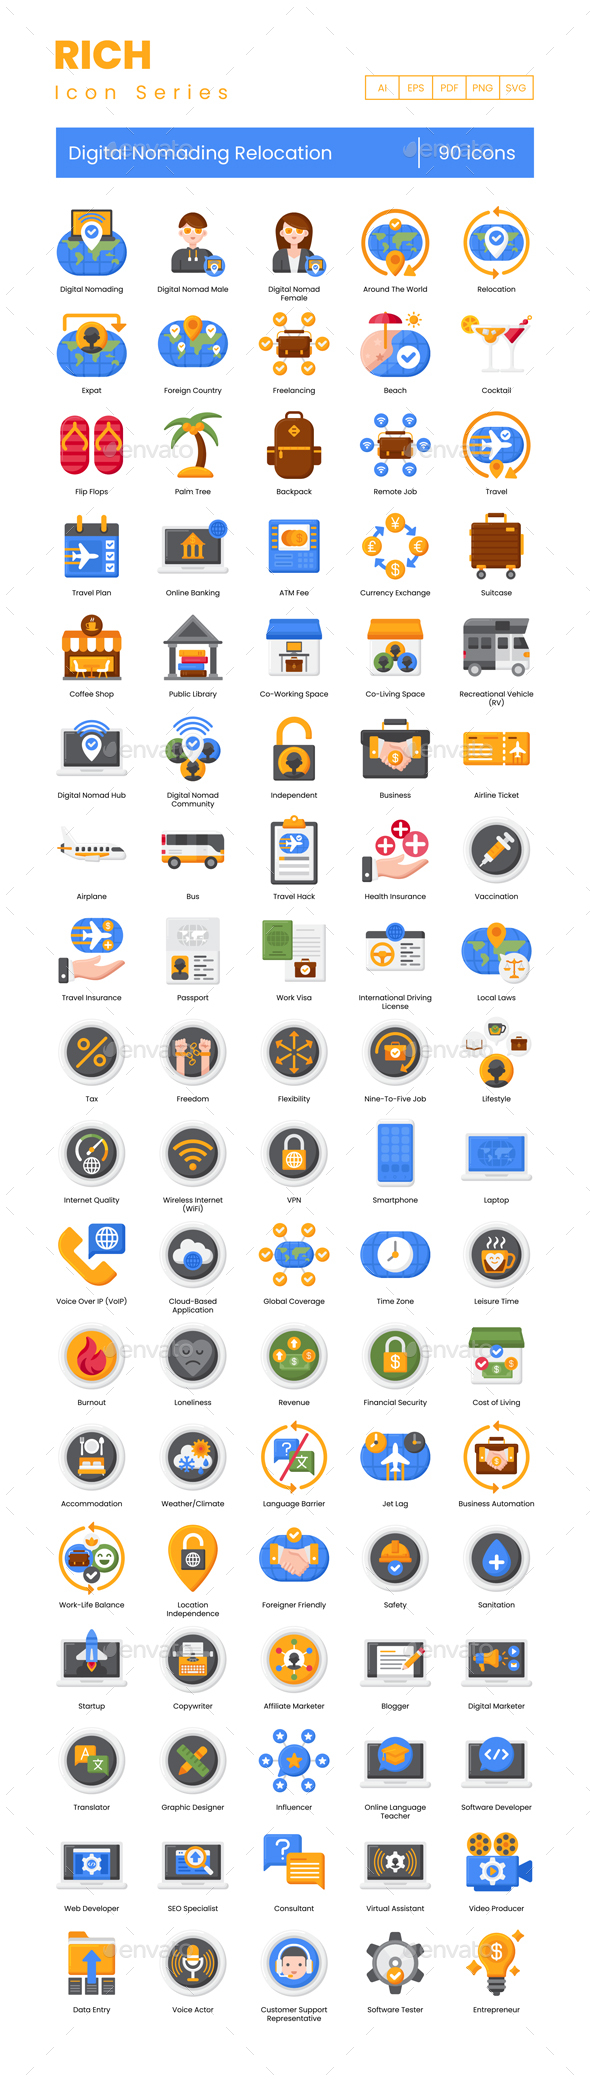 90 Digital Nomading Relocation Icons | Rich Series